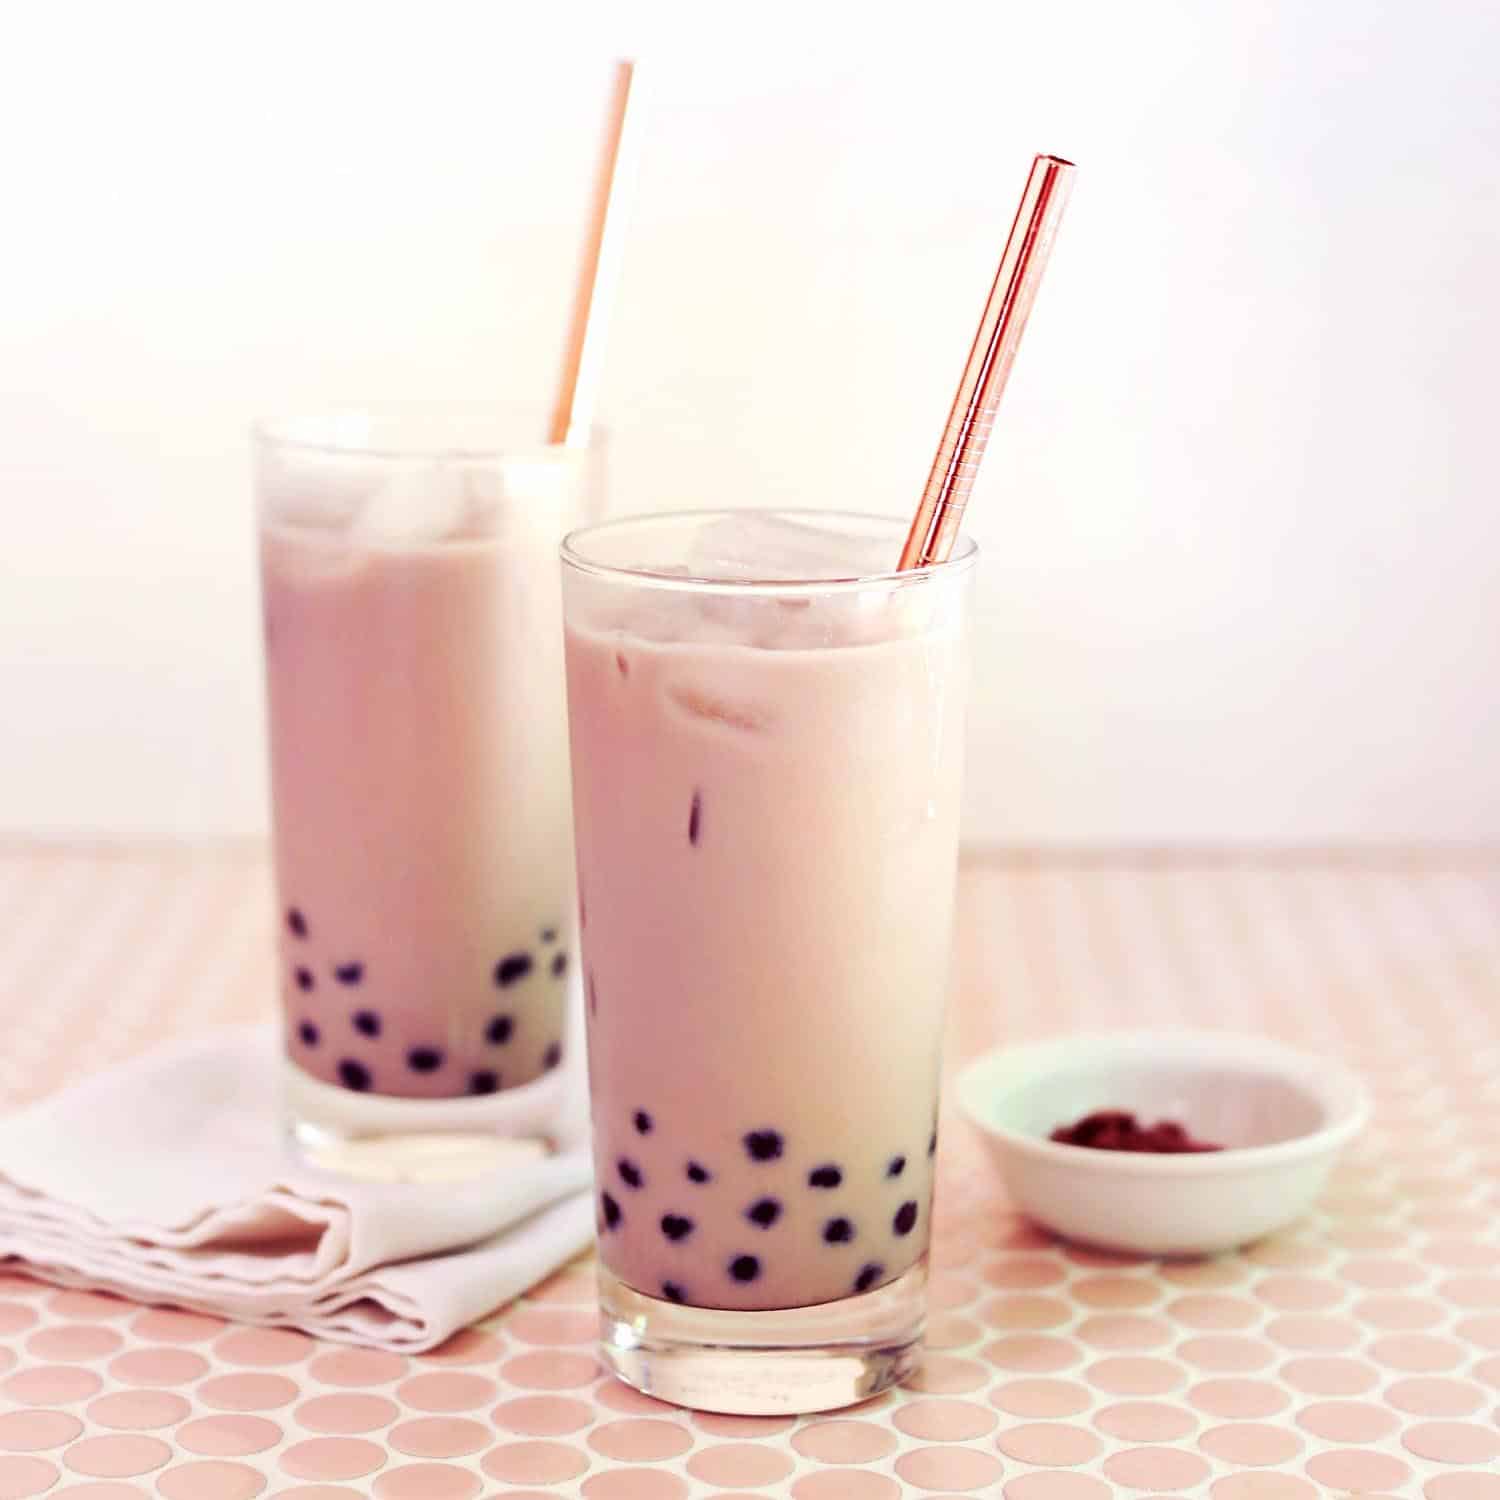 How to Prepare Boba Pearls